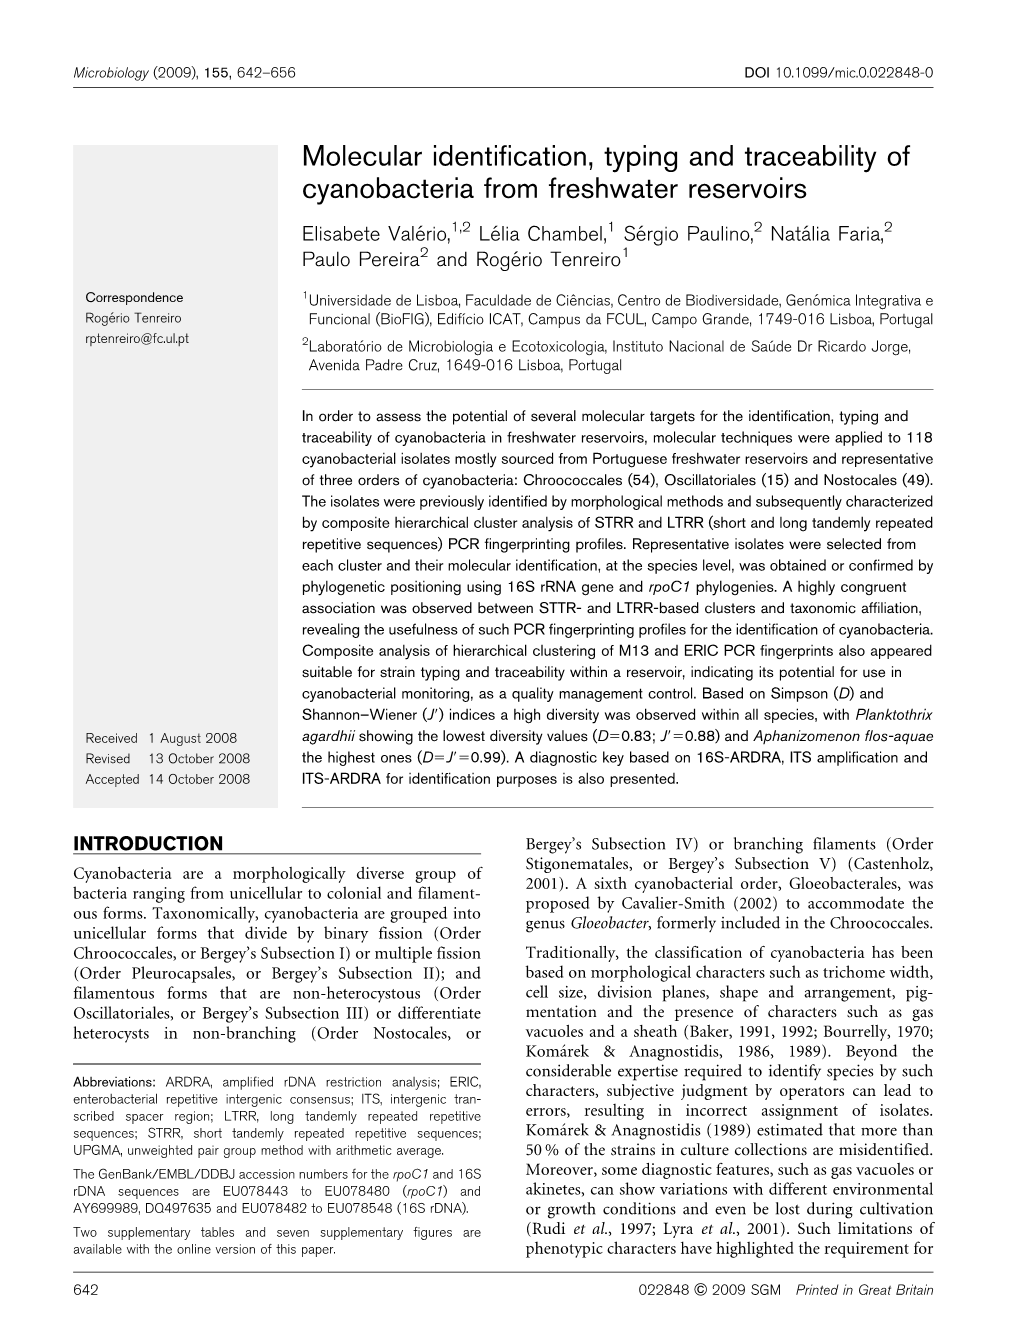 Molecular Identification, Typing and Traceability of Cyanobacteria from Freshwater Reservoirs